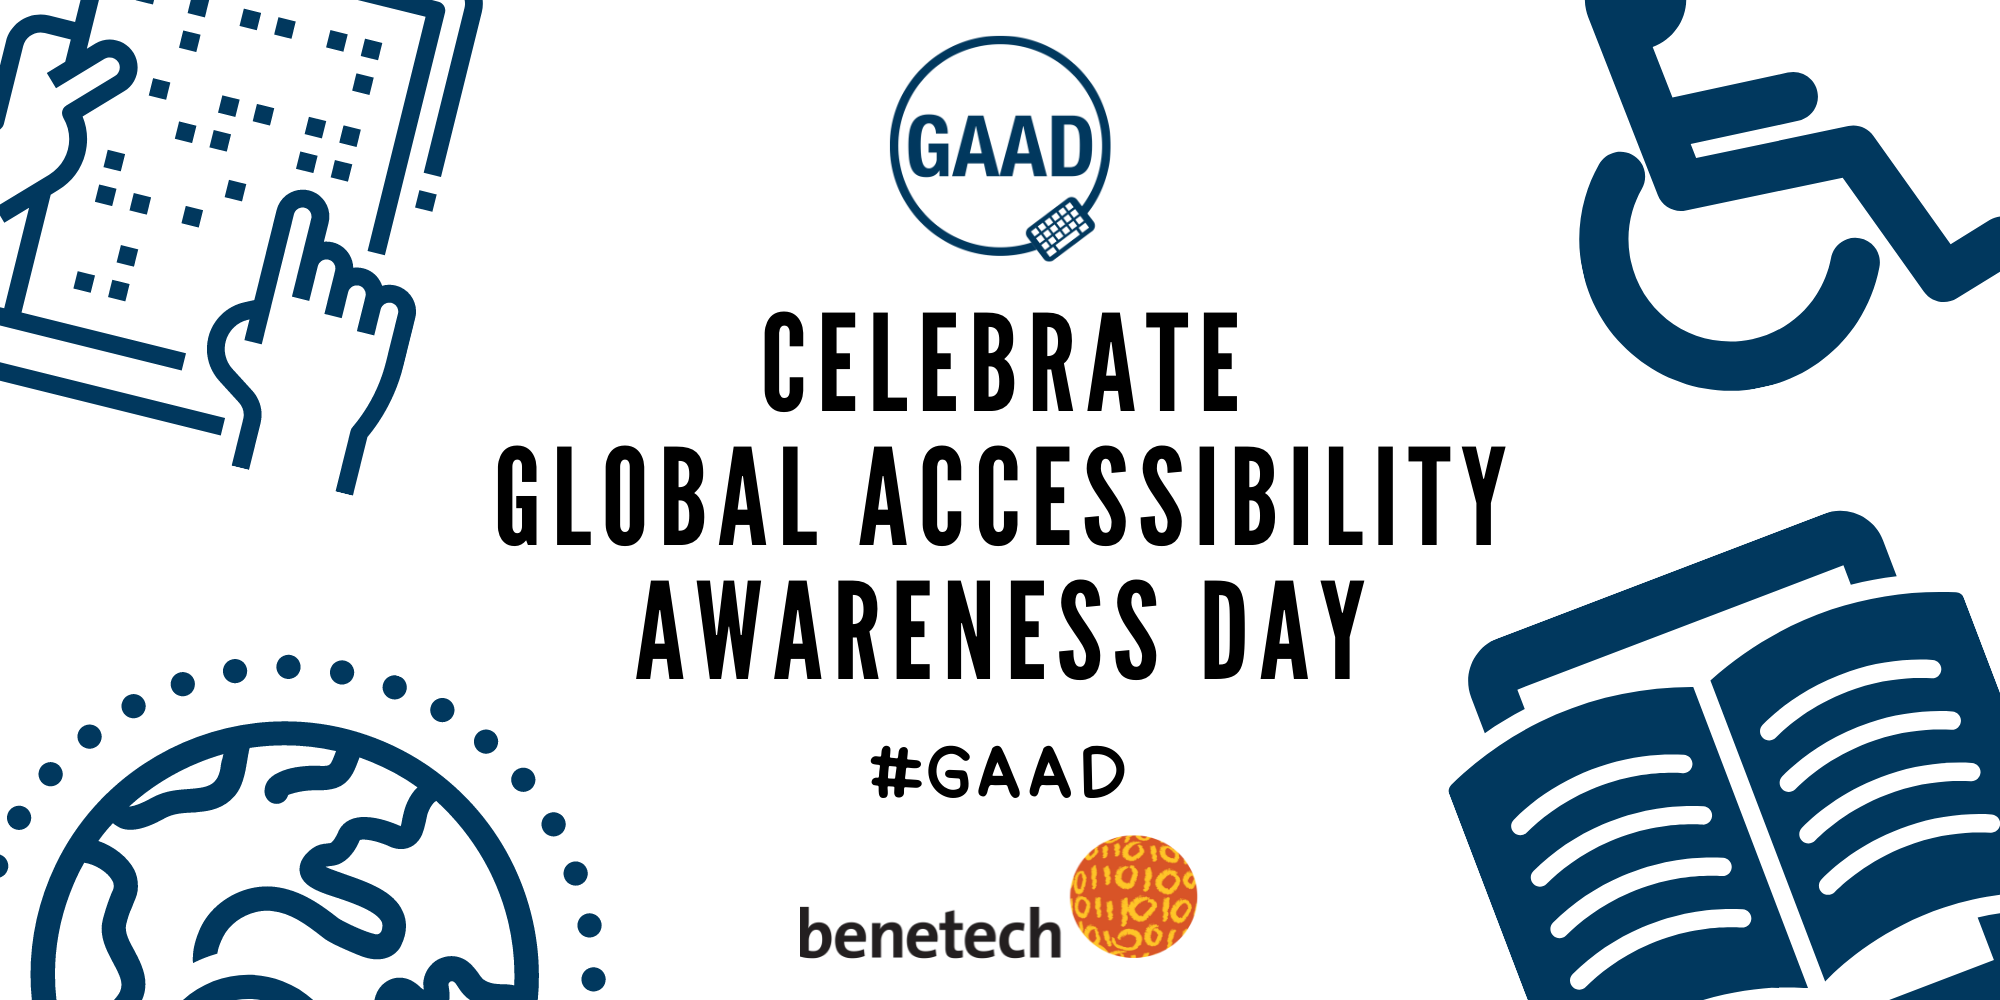 Benetech and GAAD logos. Icons depicting accessible digital books, accessibility, and the world surround text: Celebrate Global Accessibility Awareness Day! #GAAD